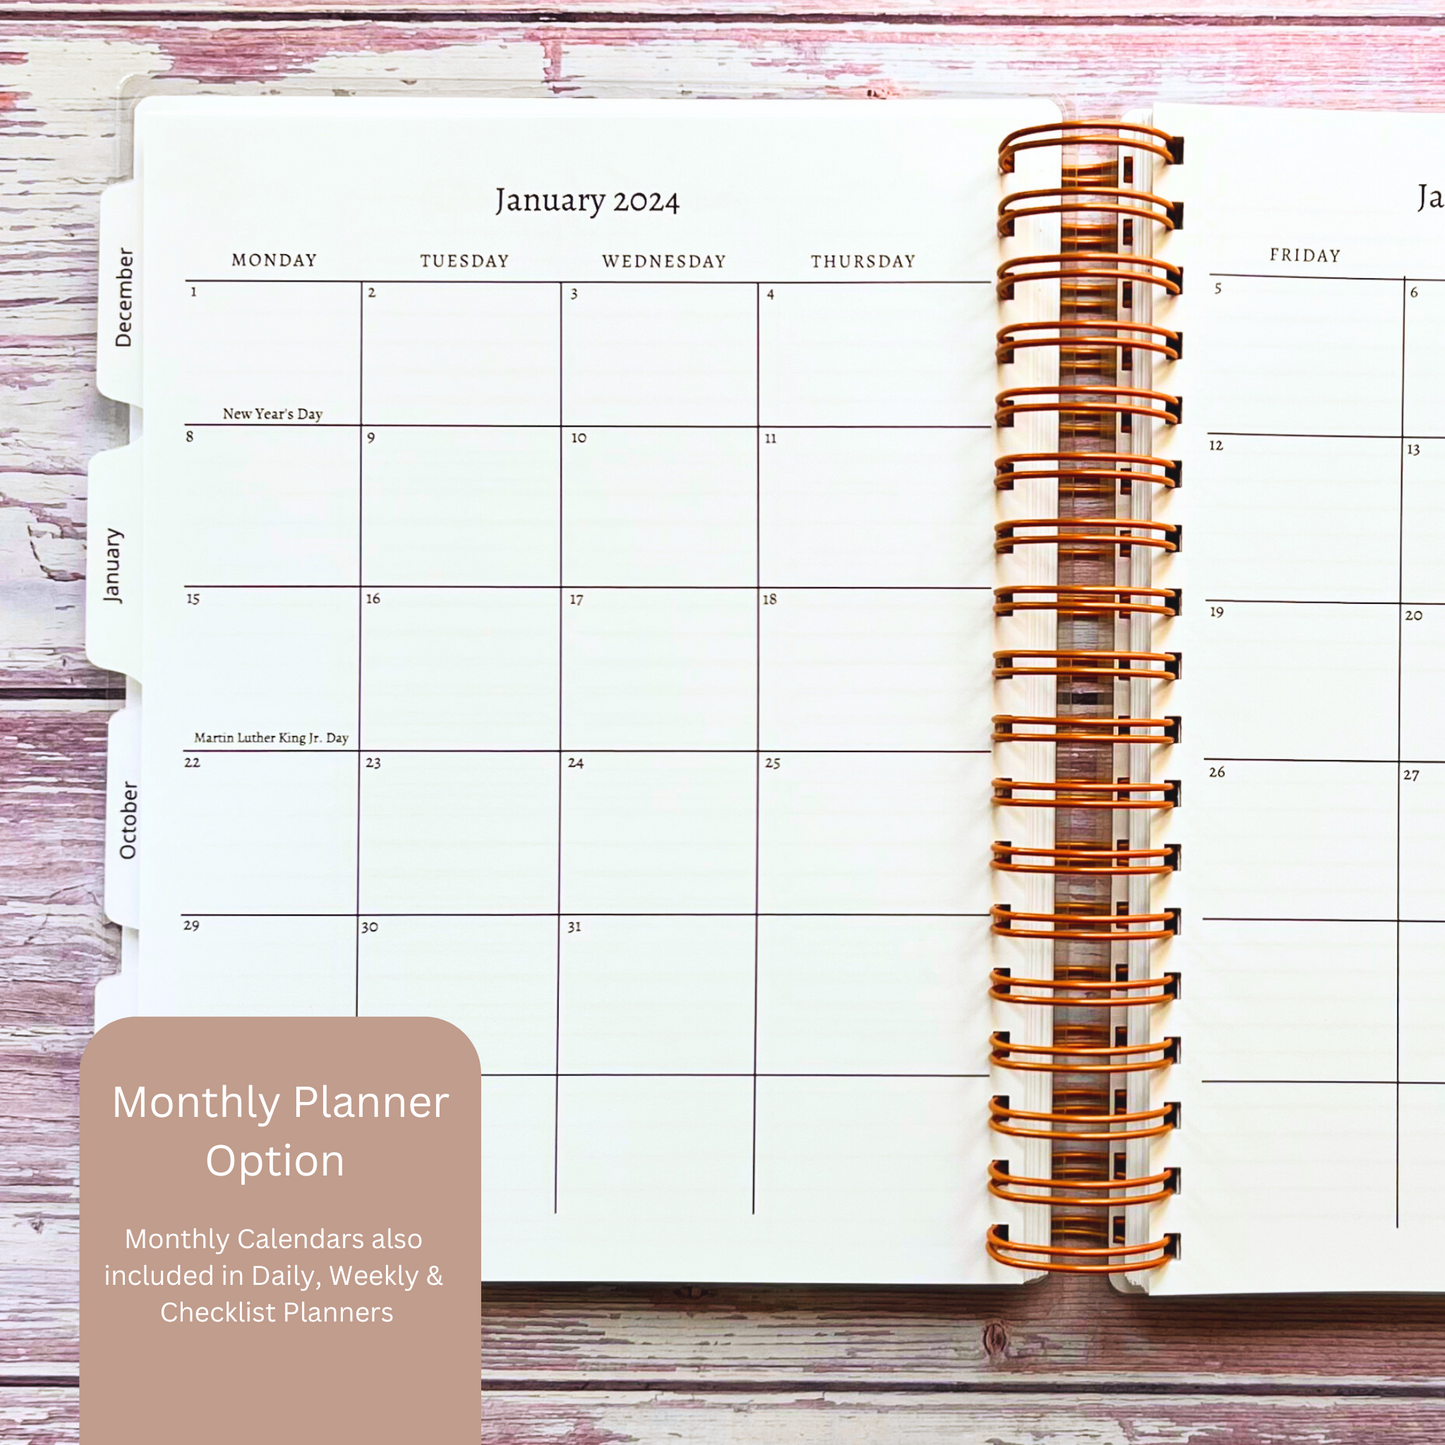 Personalized Weekly Planner | Abstract Alcohol Ink